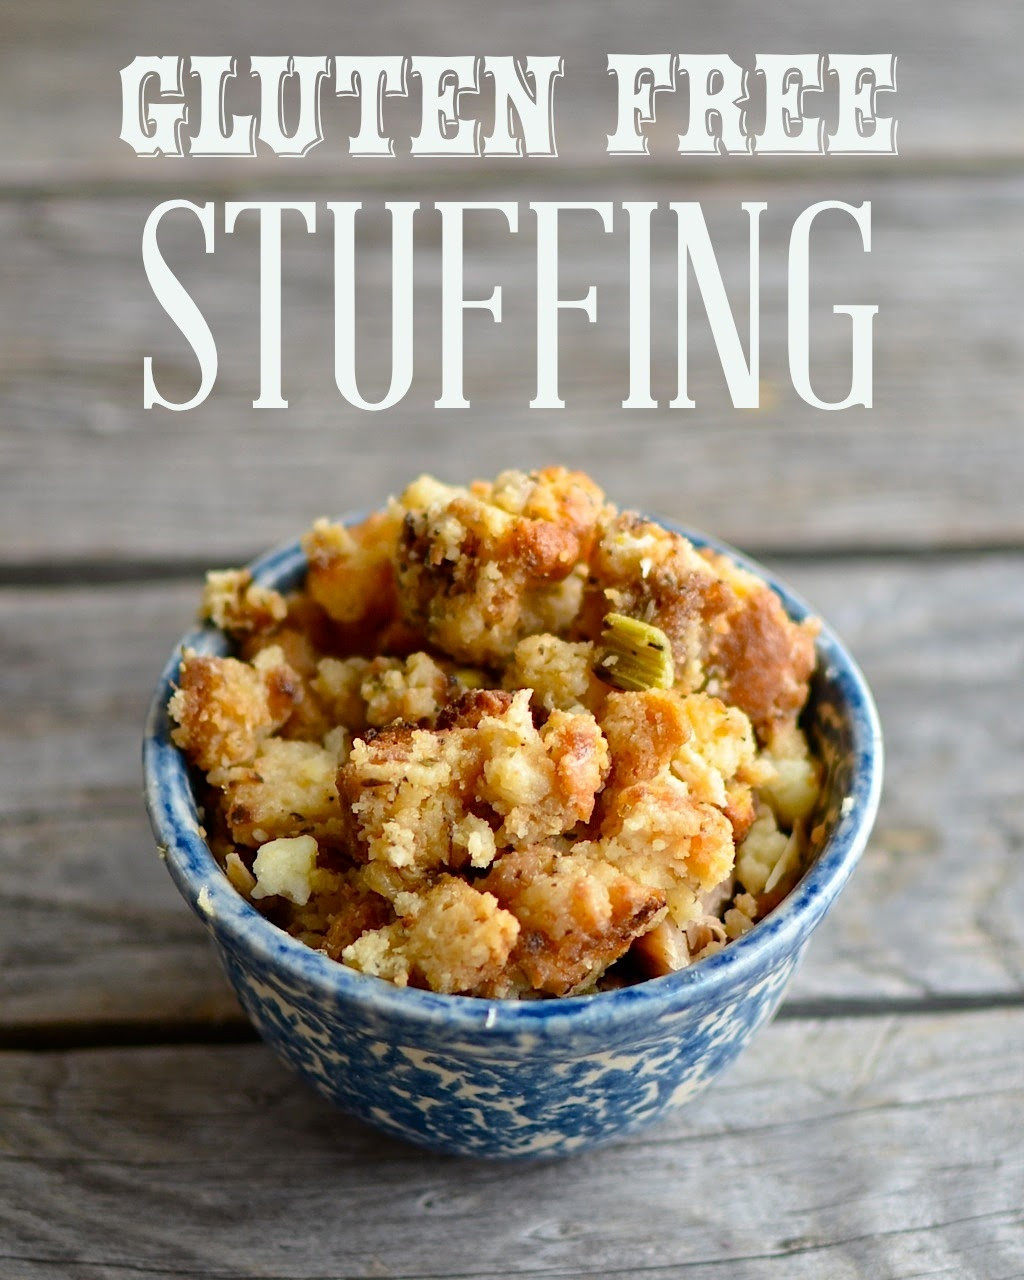 Gluten Free Stuffing Recipes For Thanksgiving
 Yammie s Glutenfreedom Gluten Free Stuffing